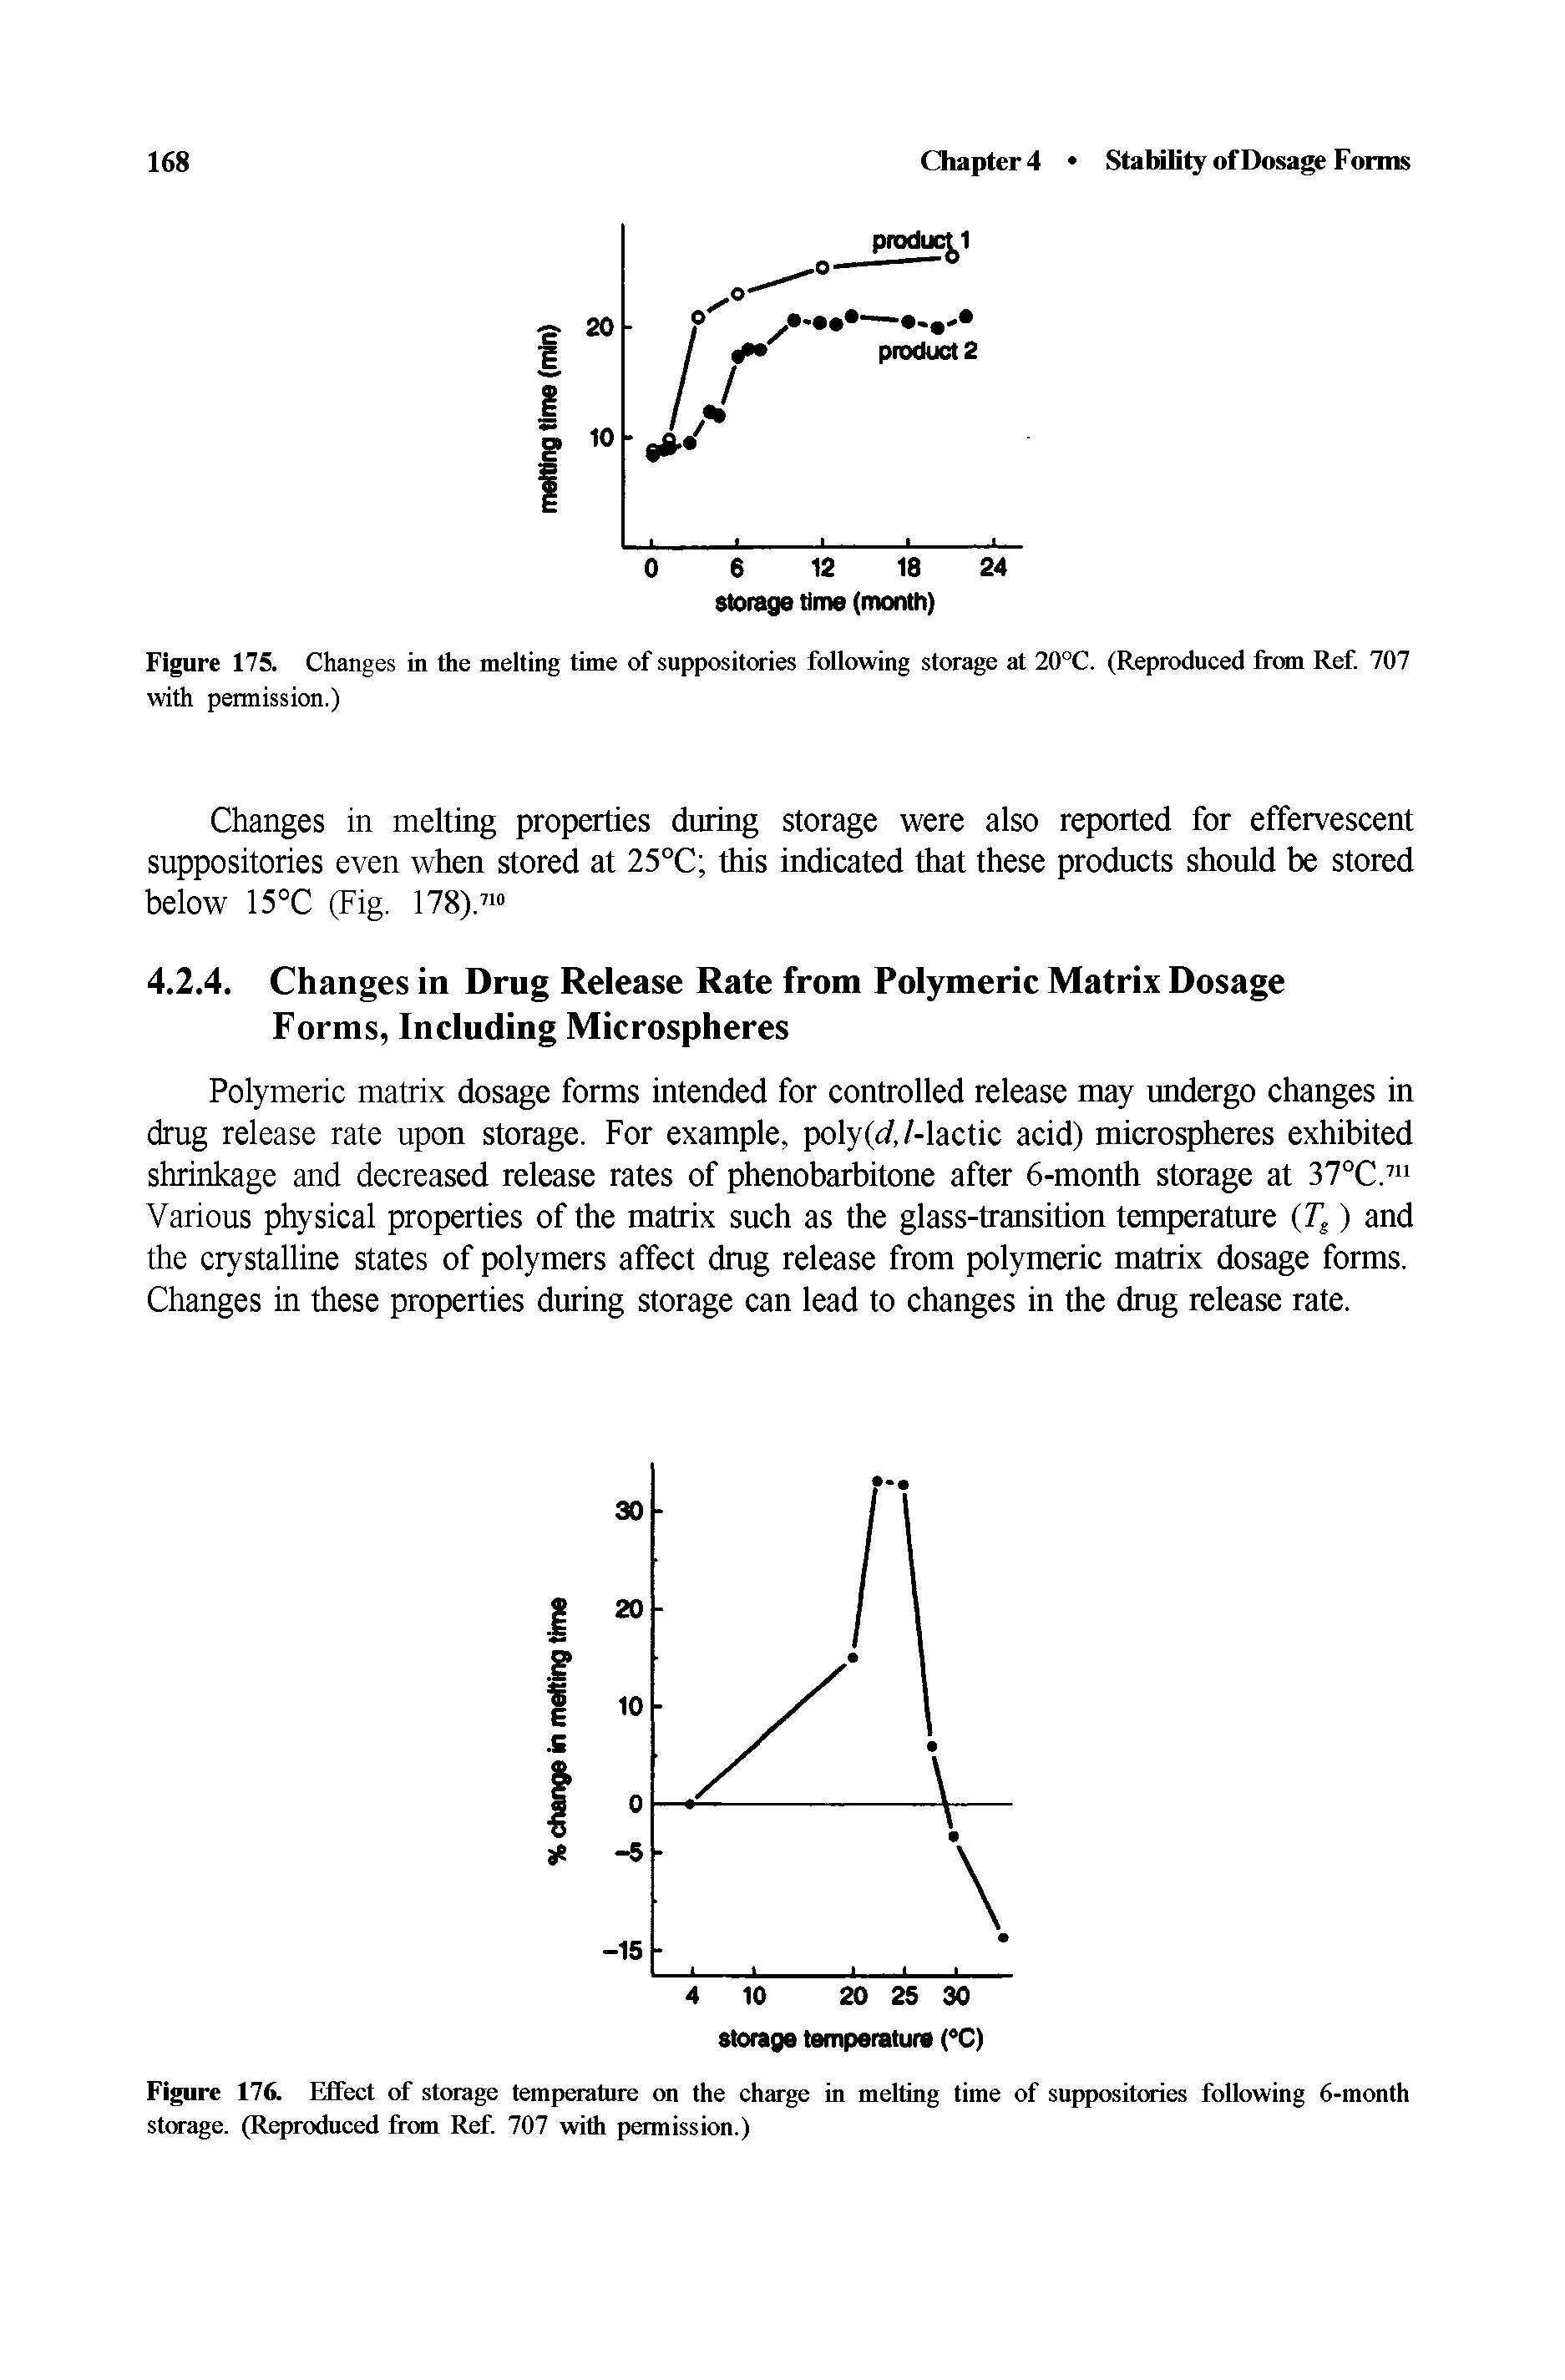 Figure 176. Effect of storage temperature on the charge in melting time of suppositories following 6-month storage. (Reproduced from Ref. 707 with permission.)...